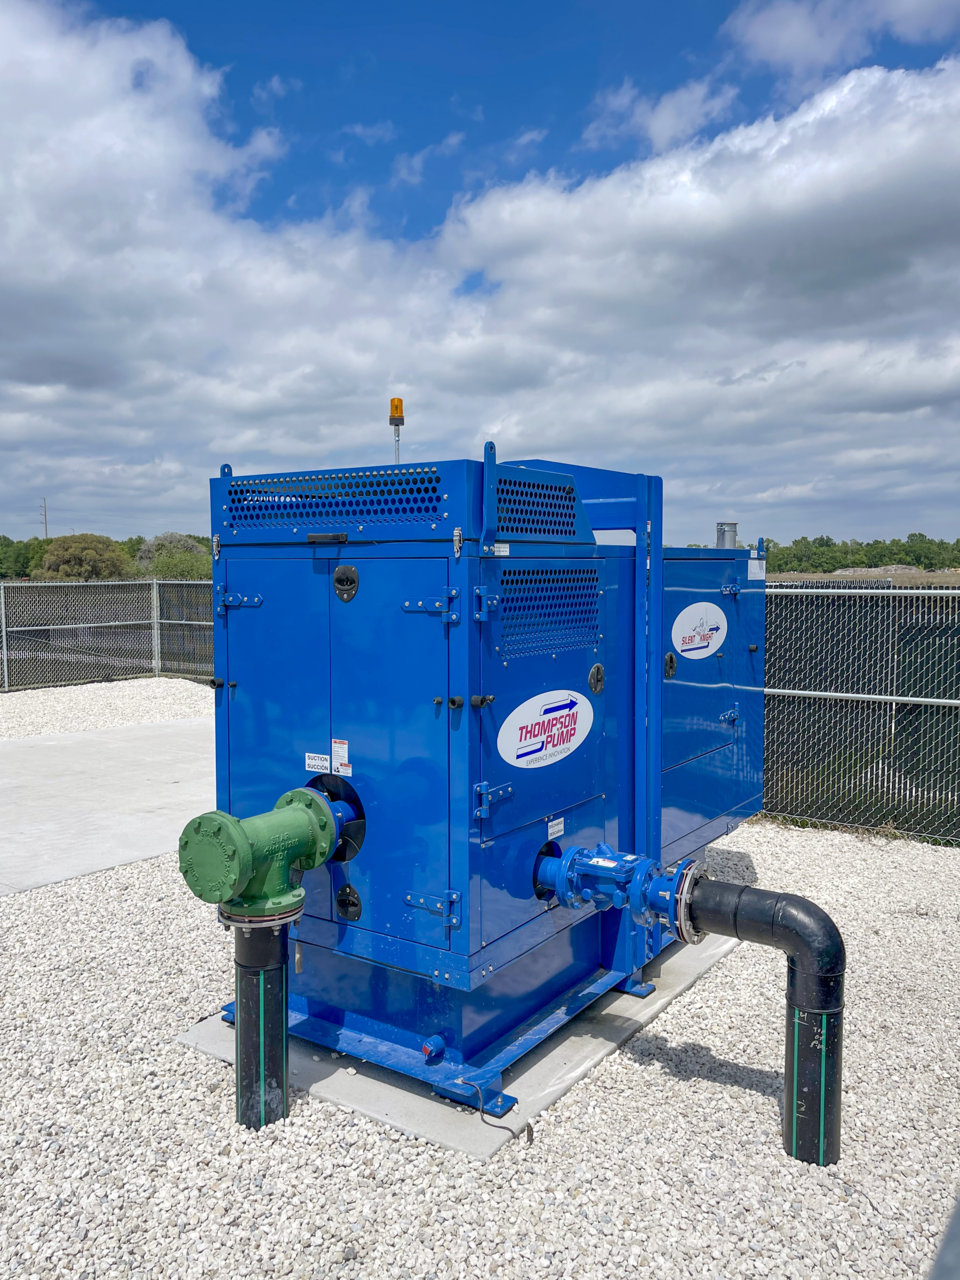 Hurricane Irma Tests Lift Station Bypass Pumps in North Port, Florida